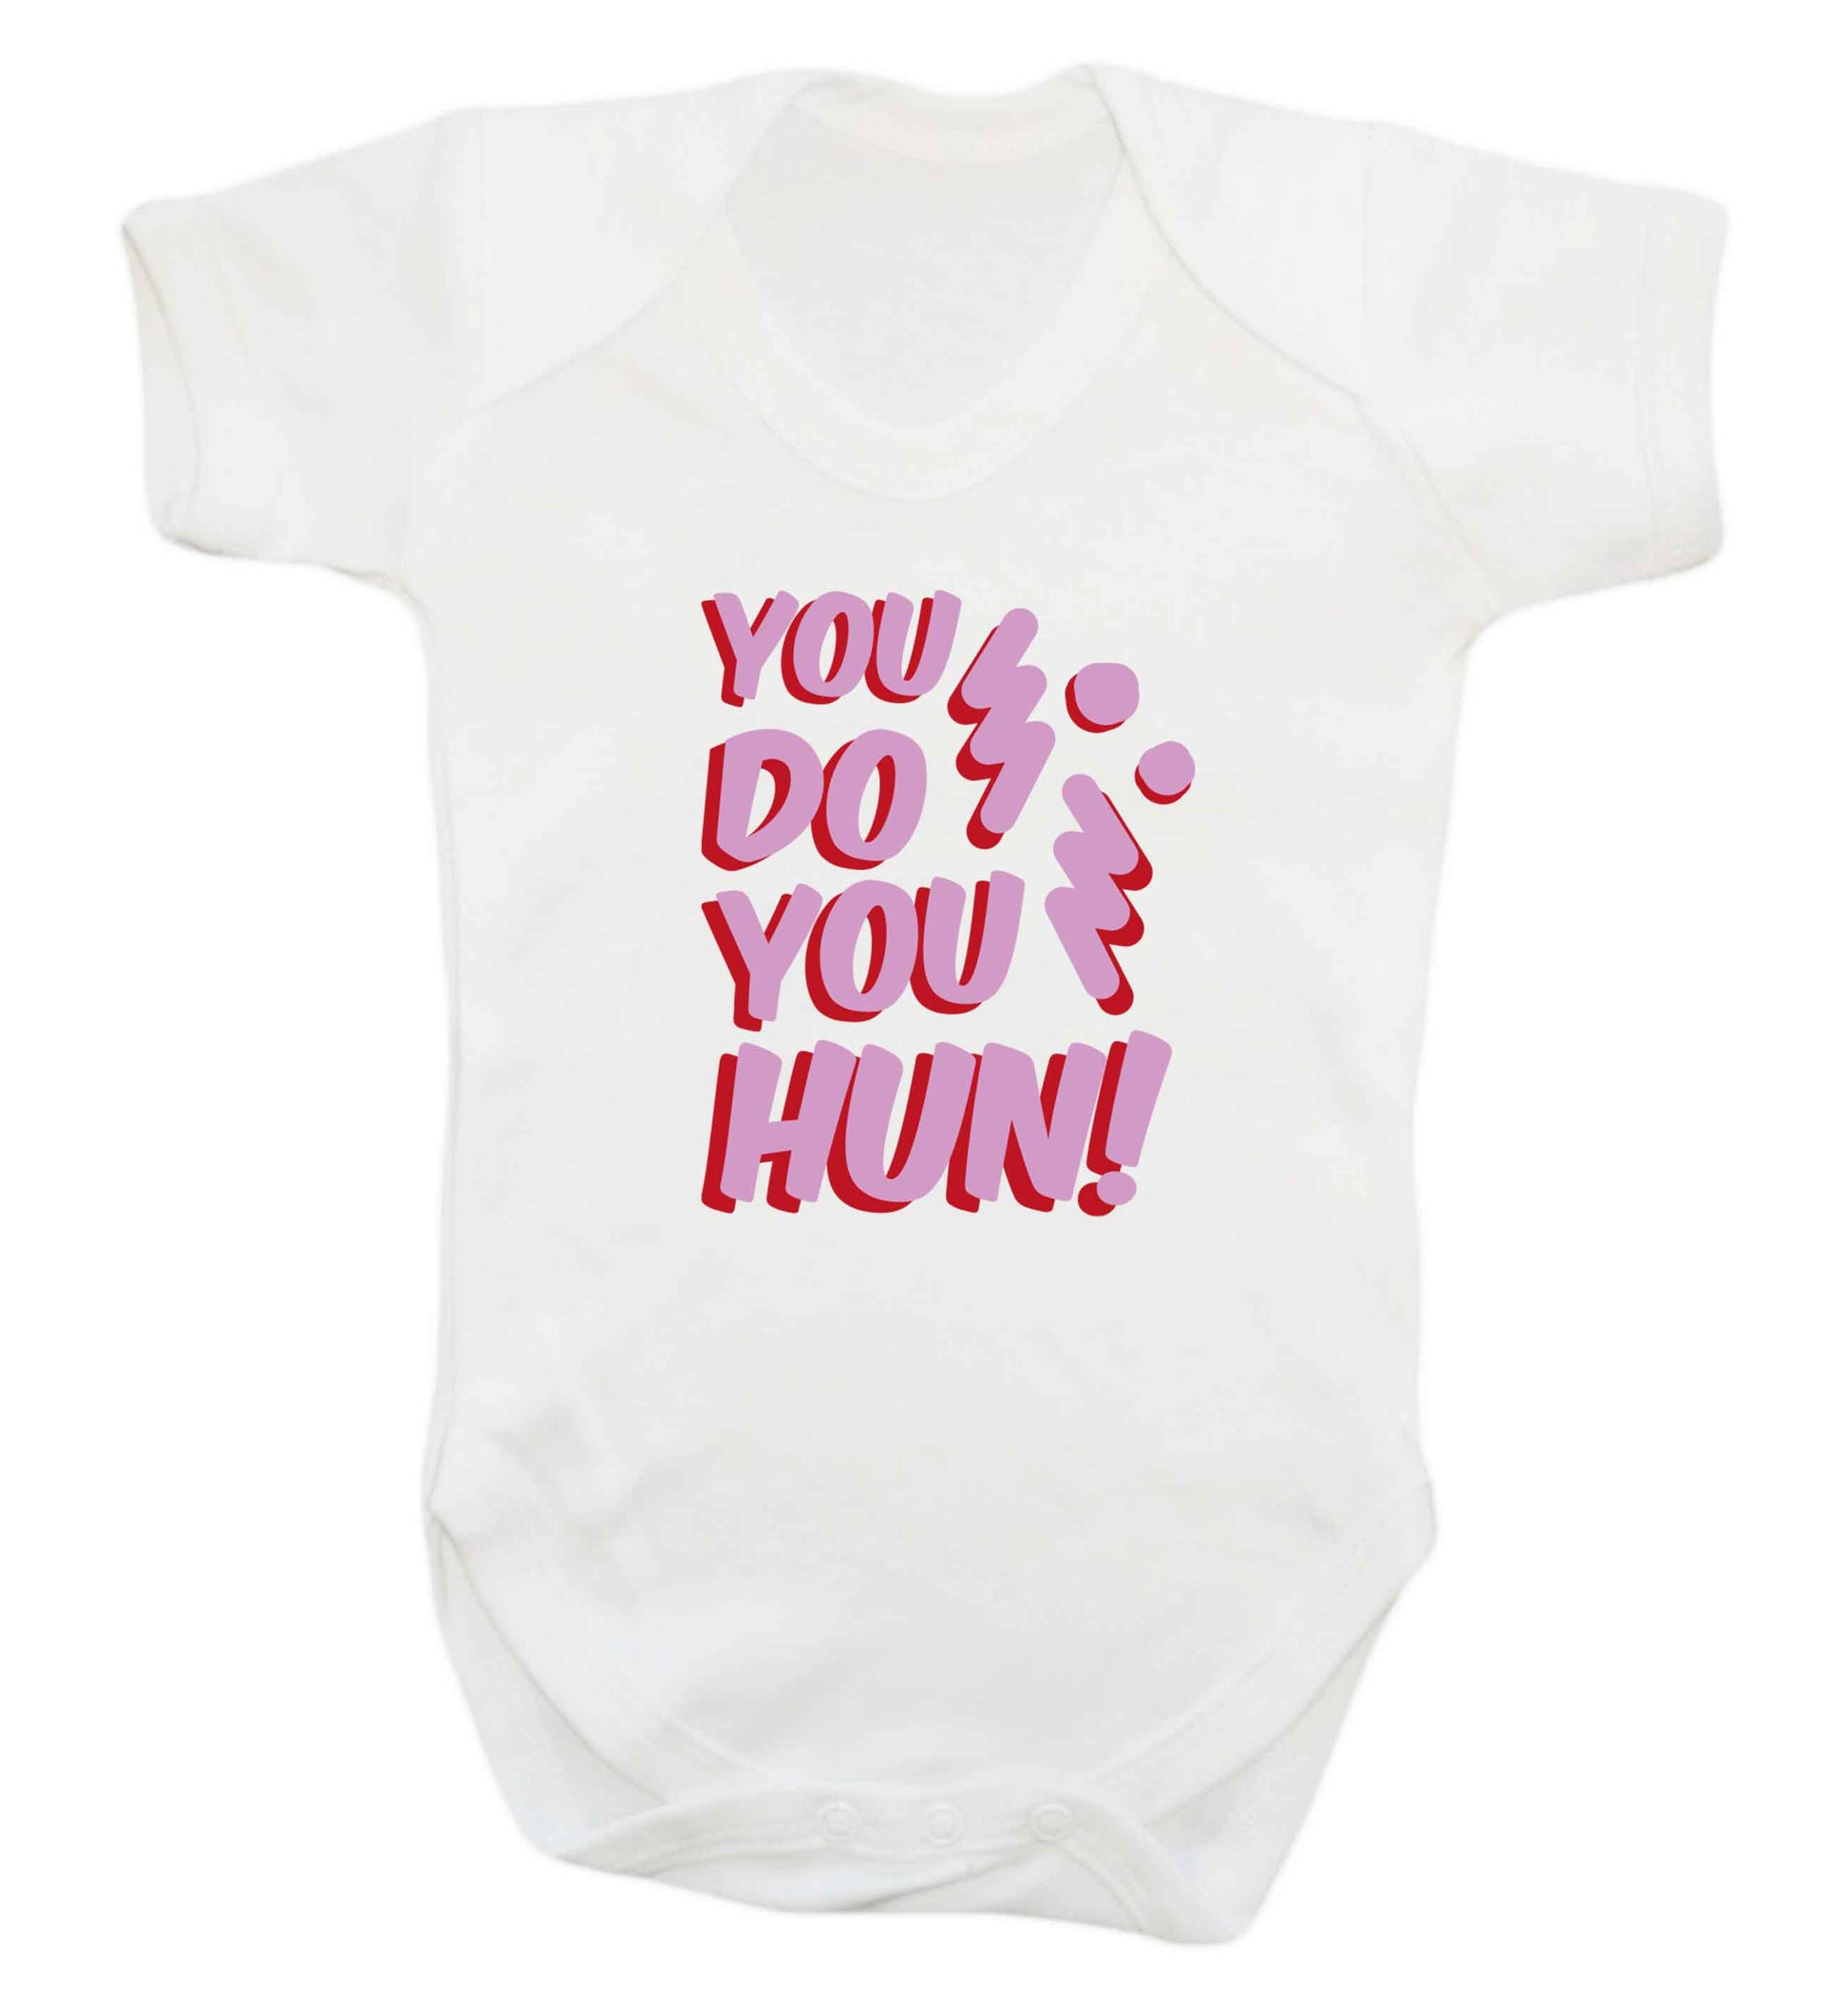 You do you hun baby vest white 18-24 months